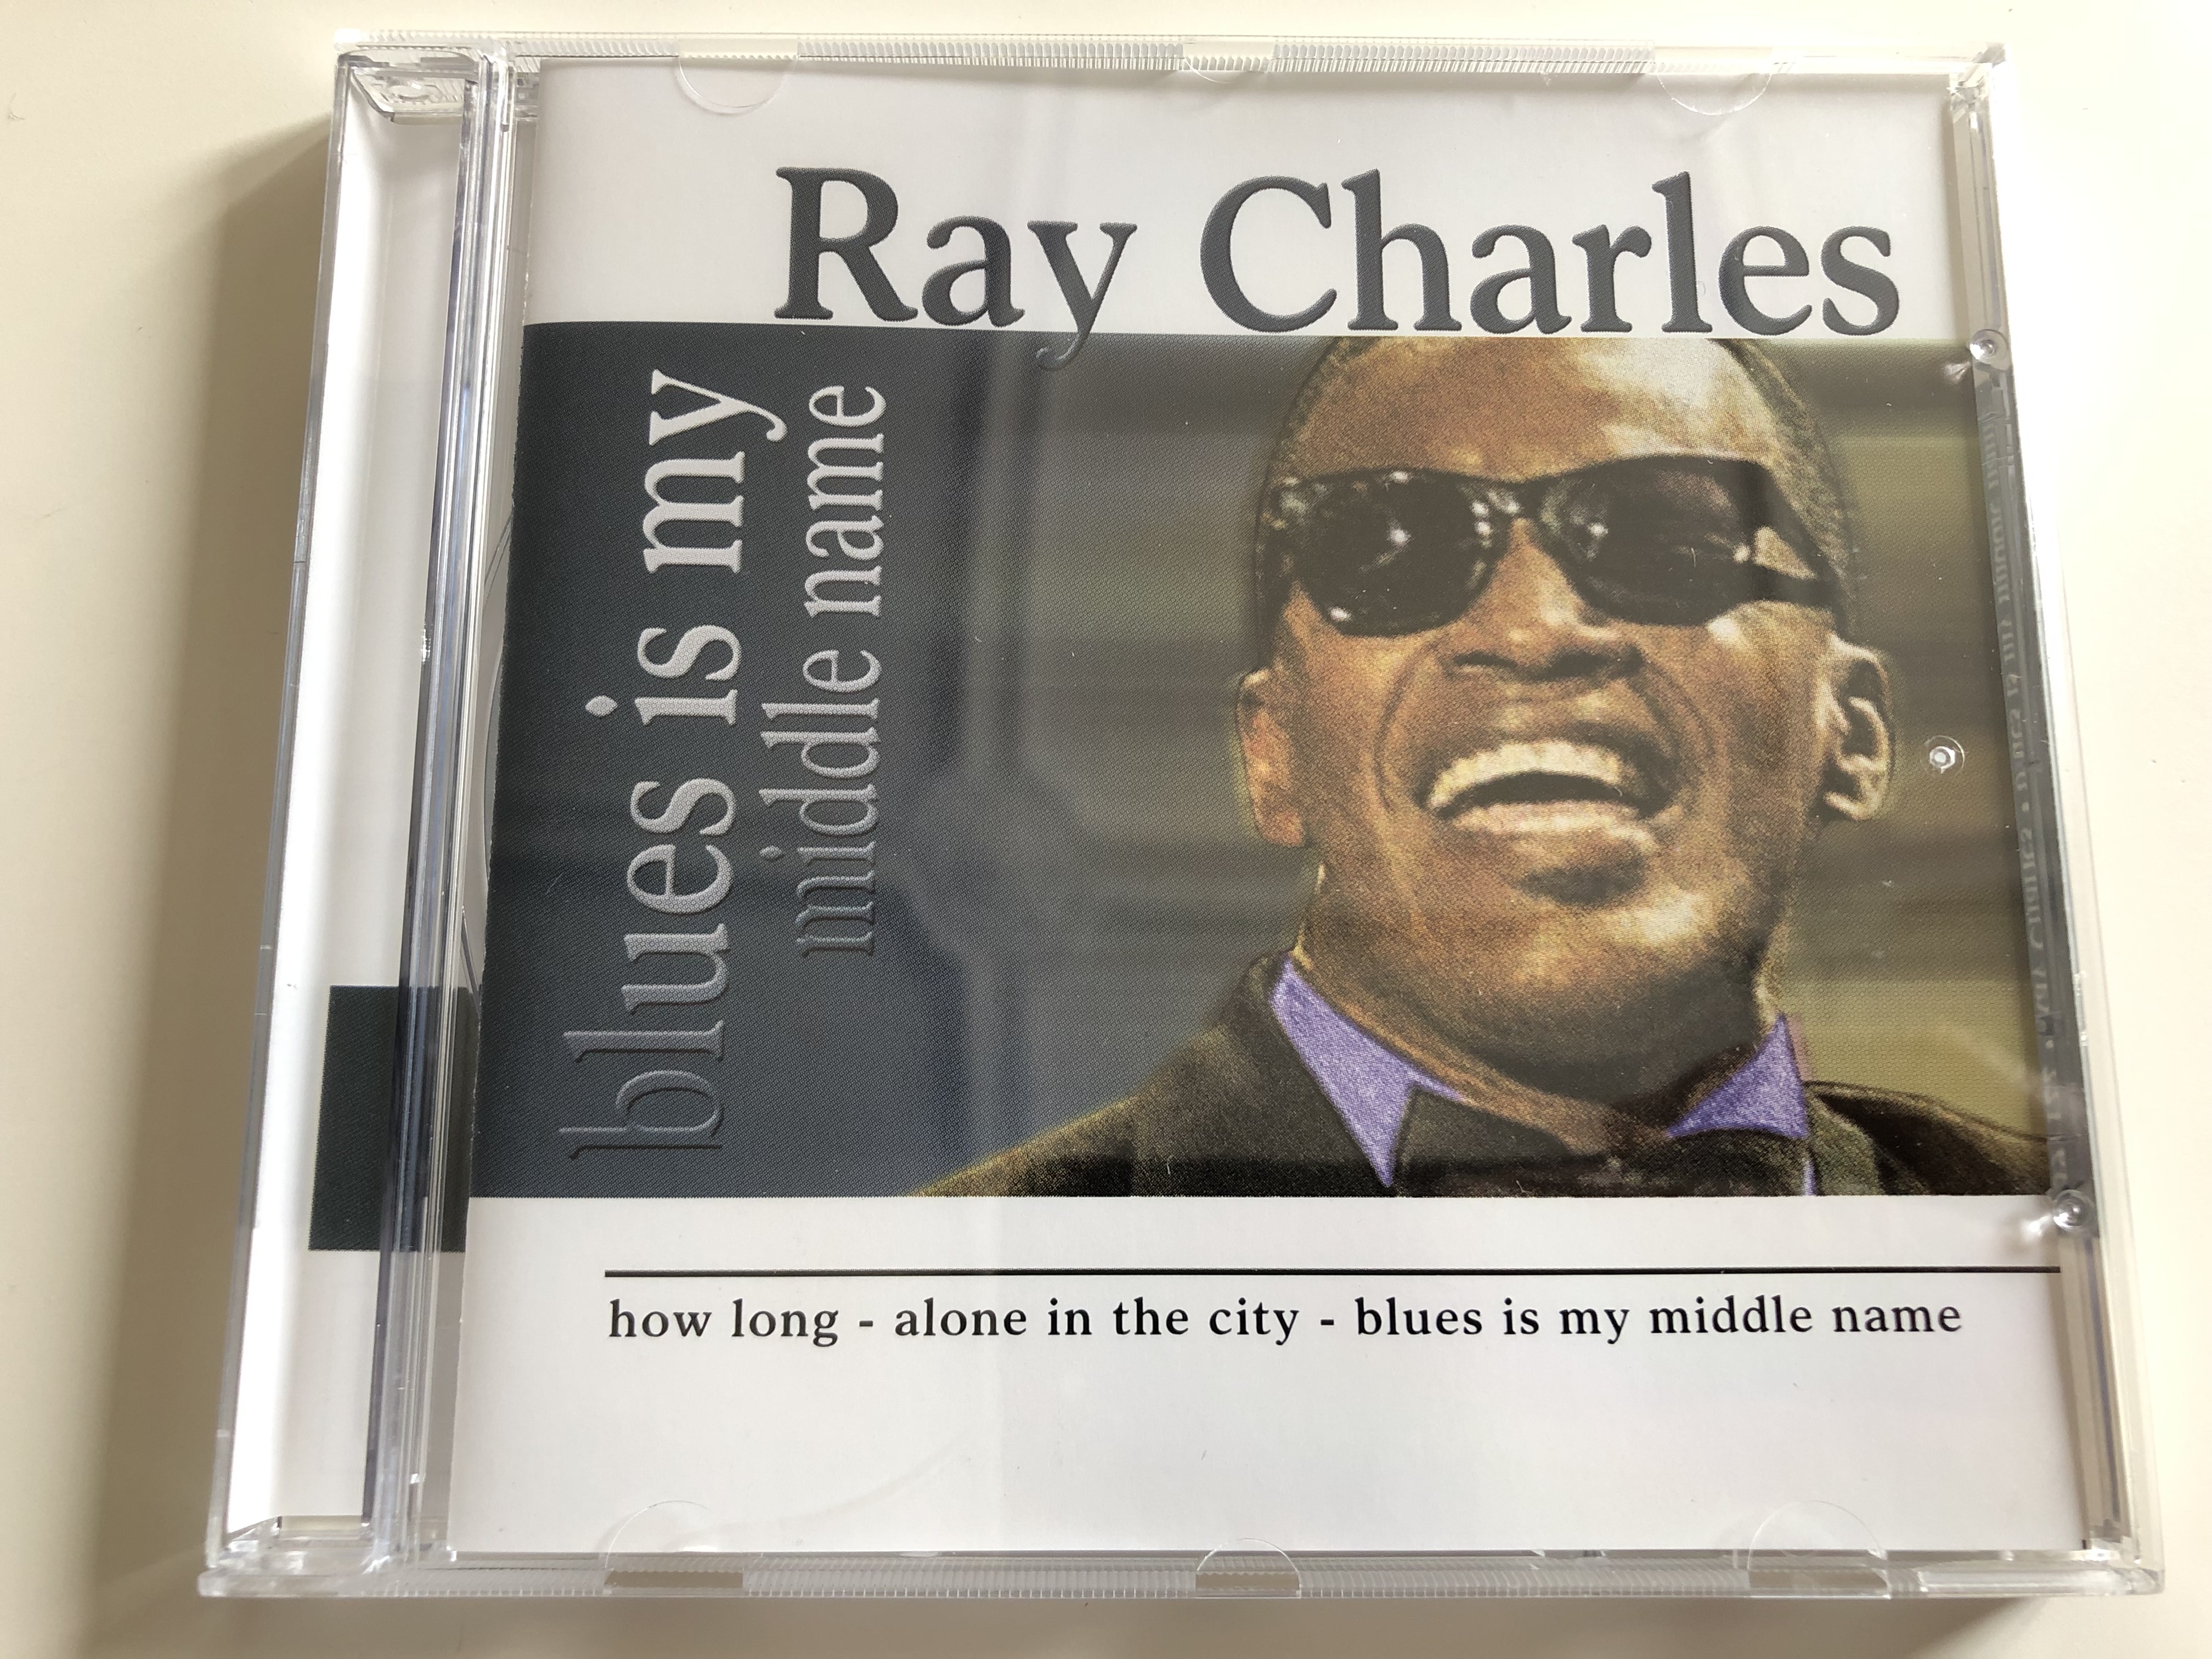 ray-charles-blues-is-my-middle-name-how-long-alone-in-the-city-audio-cd-2005-mm-1397122-1-.jpg